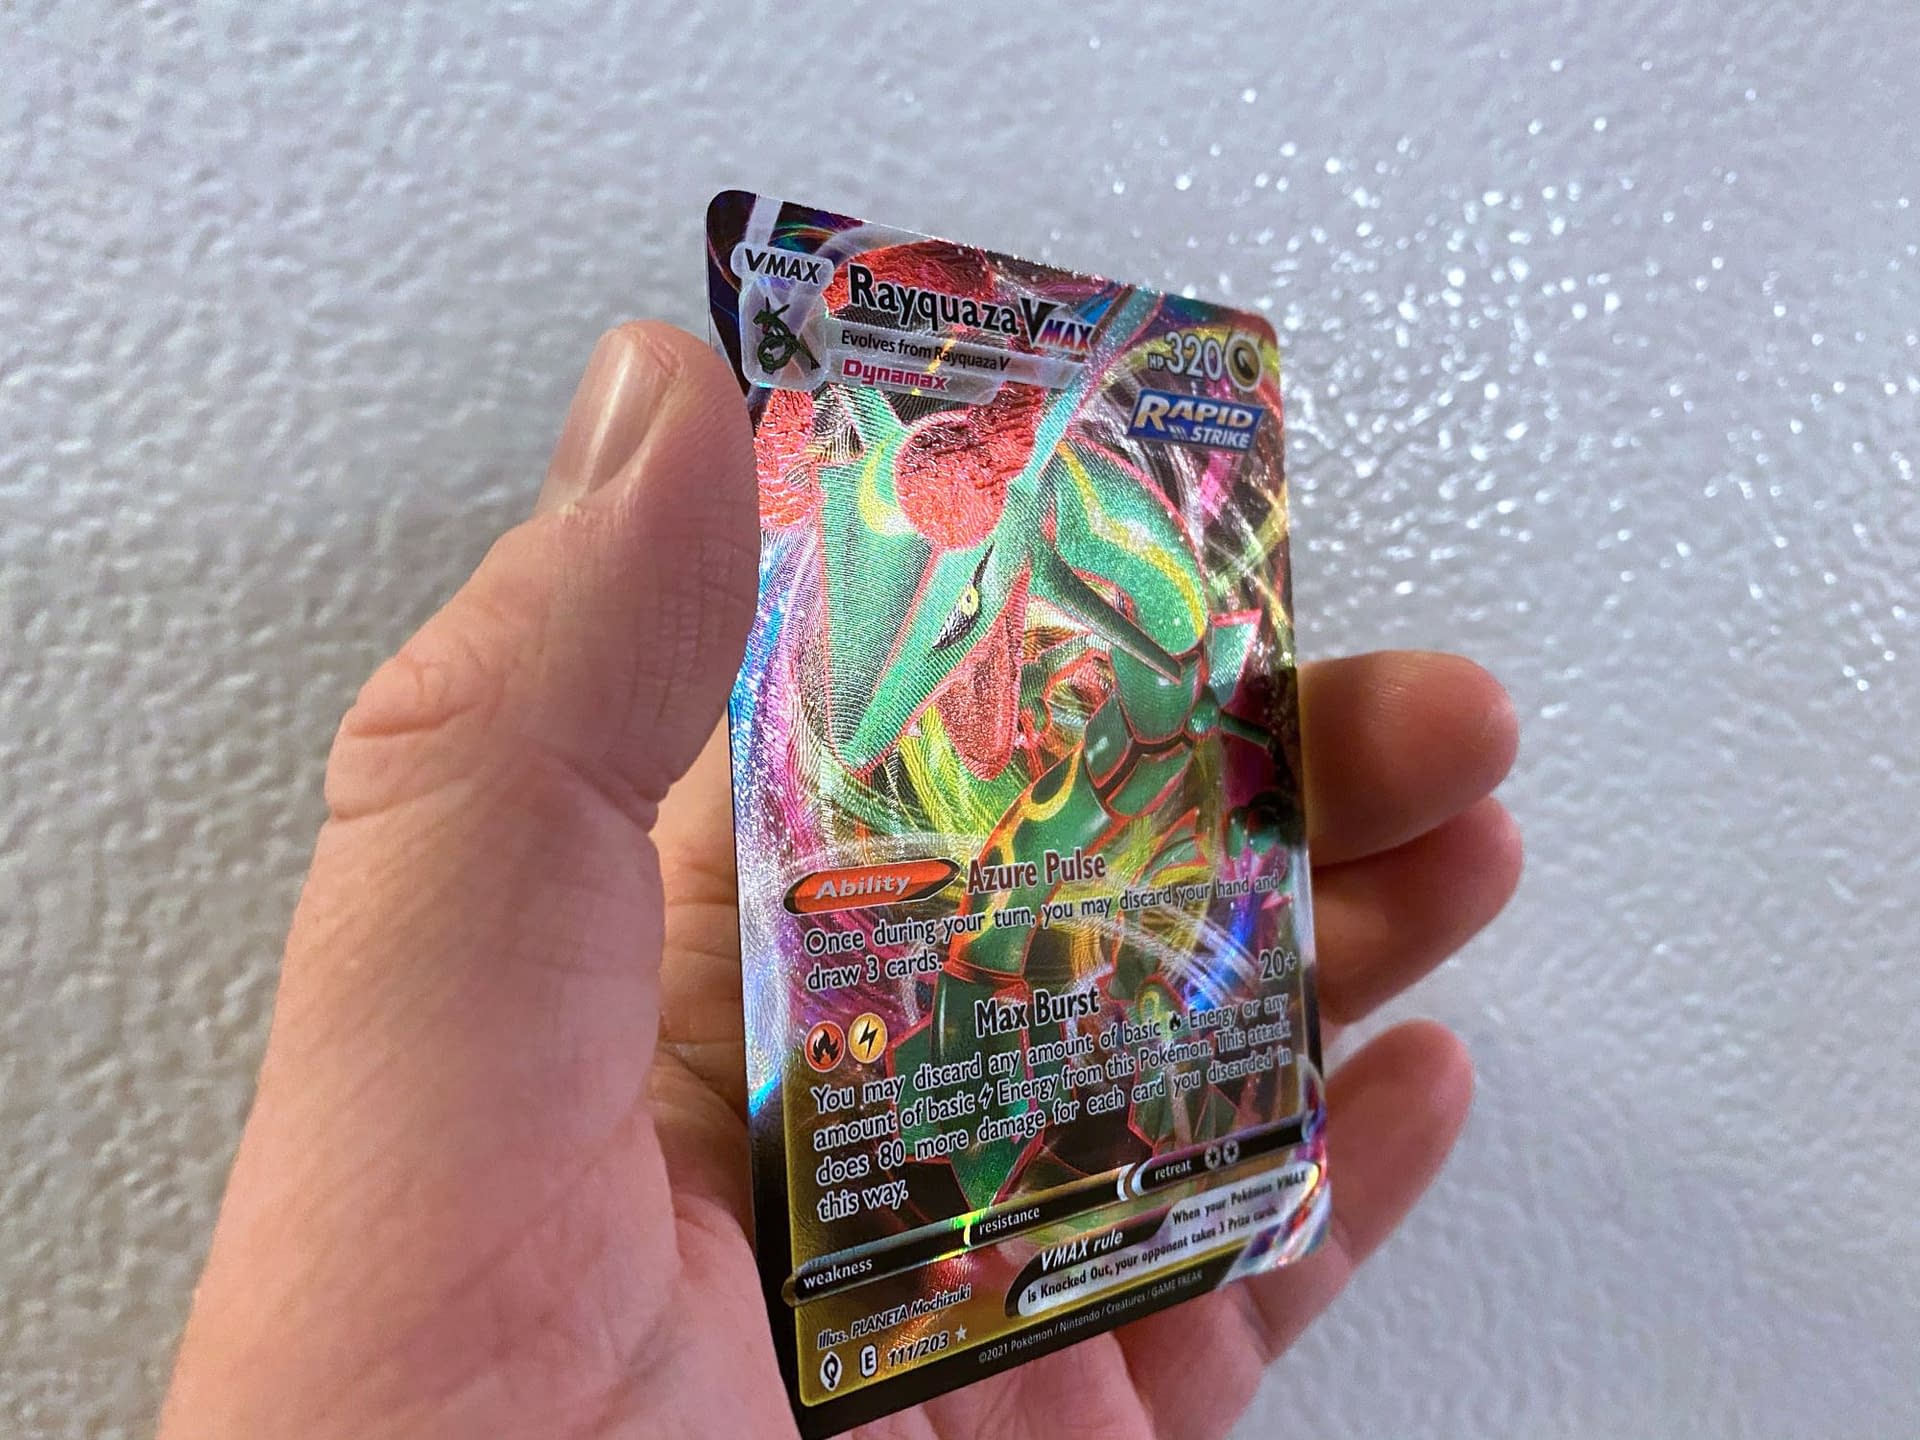 This Card from Obsidian Flames BROKE Rayquaza VMAX. 